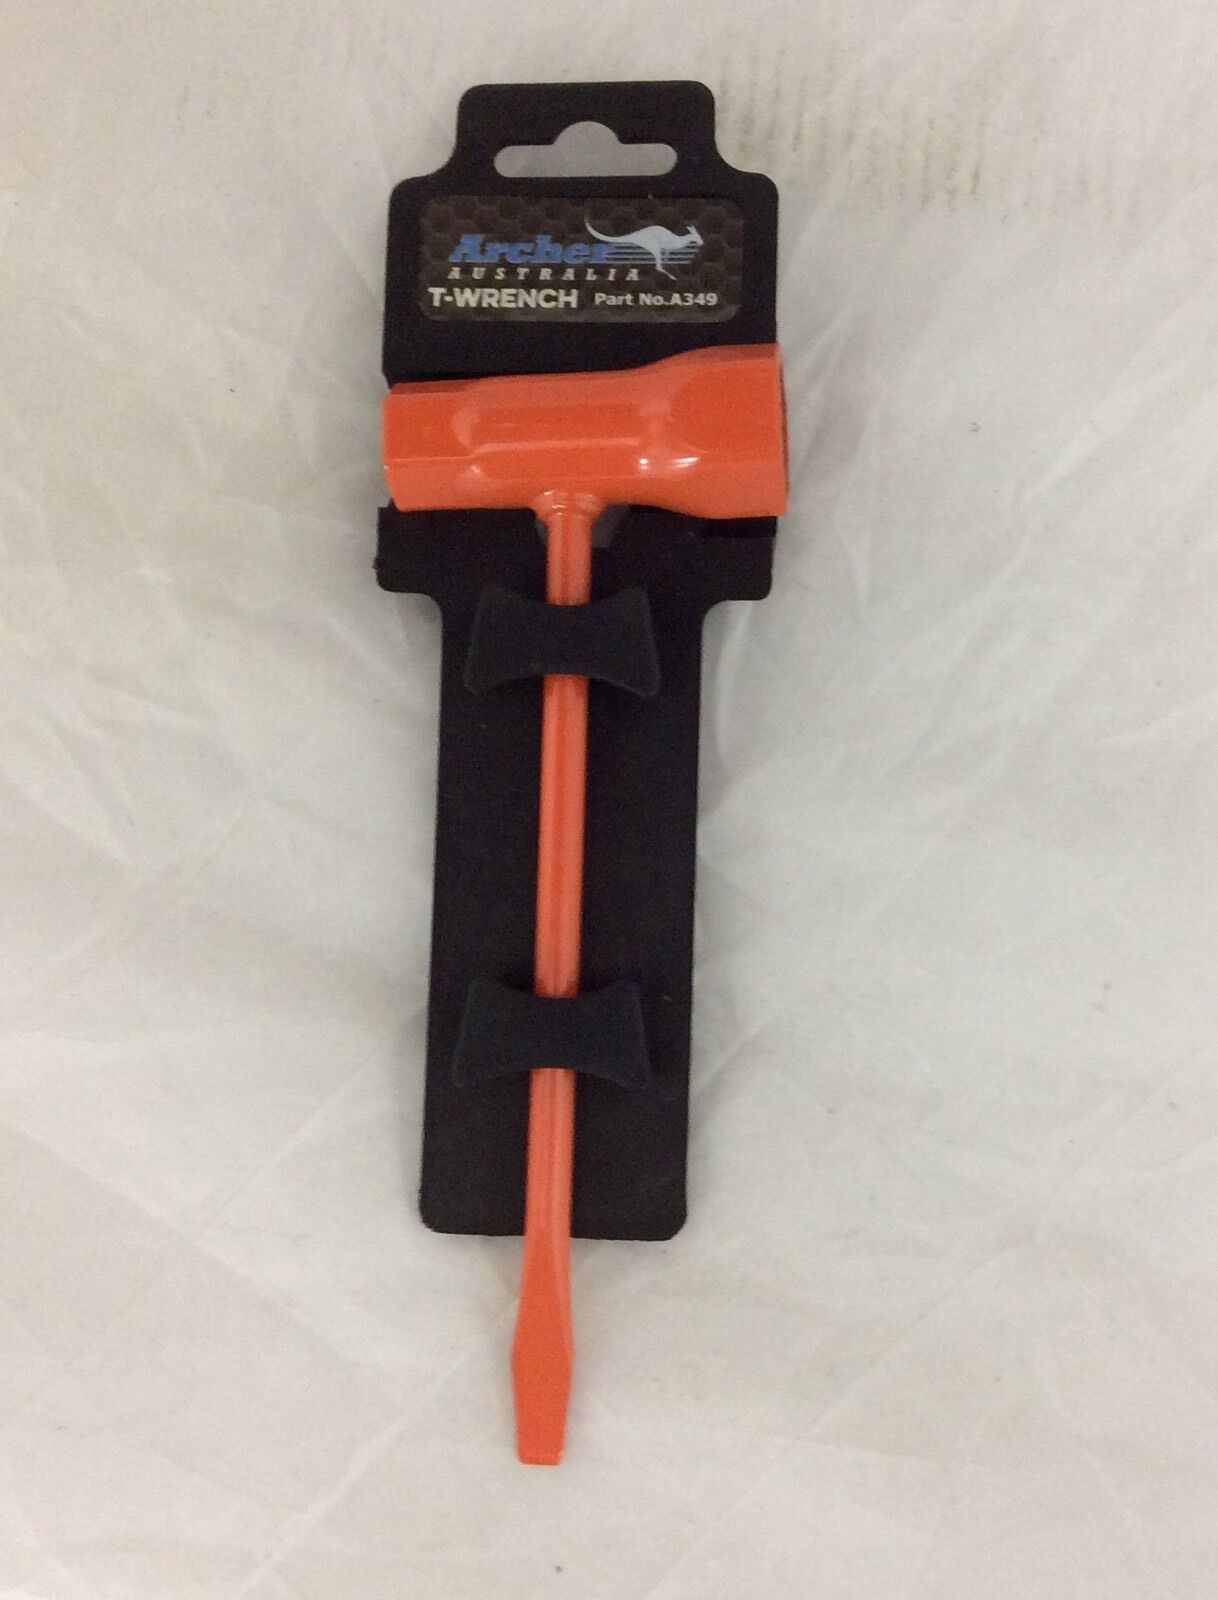 Chainsaw Combo T Wrench 3/4" (19mm) X 1/2" (13mm) Bright Orange Scrench Husky